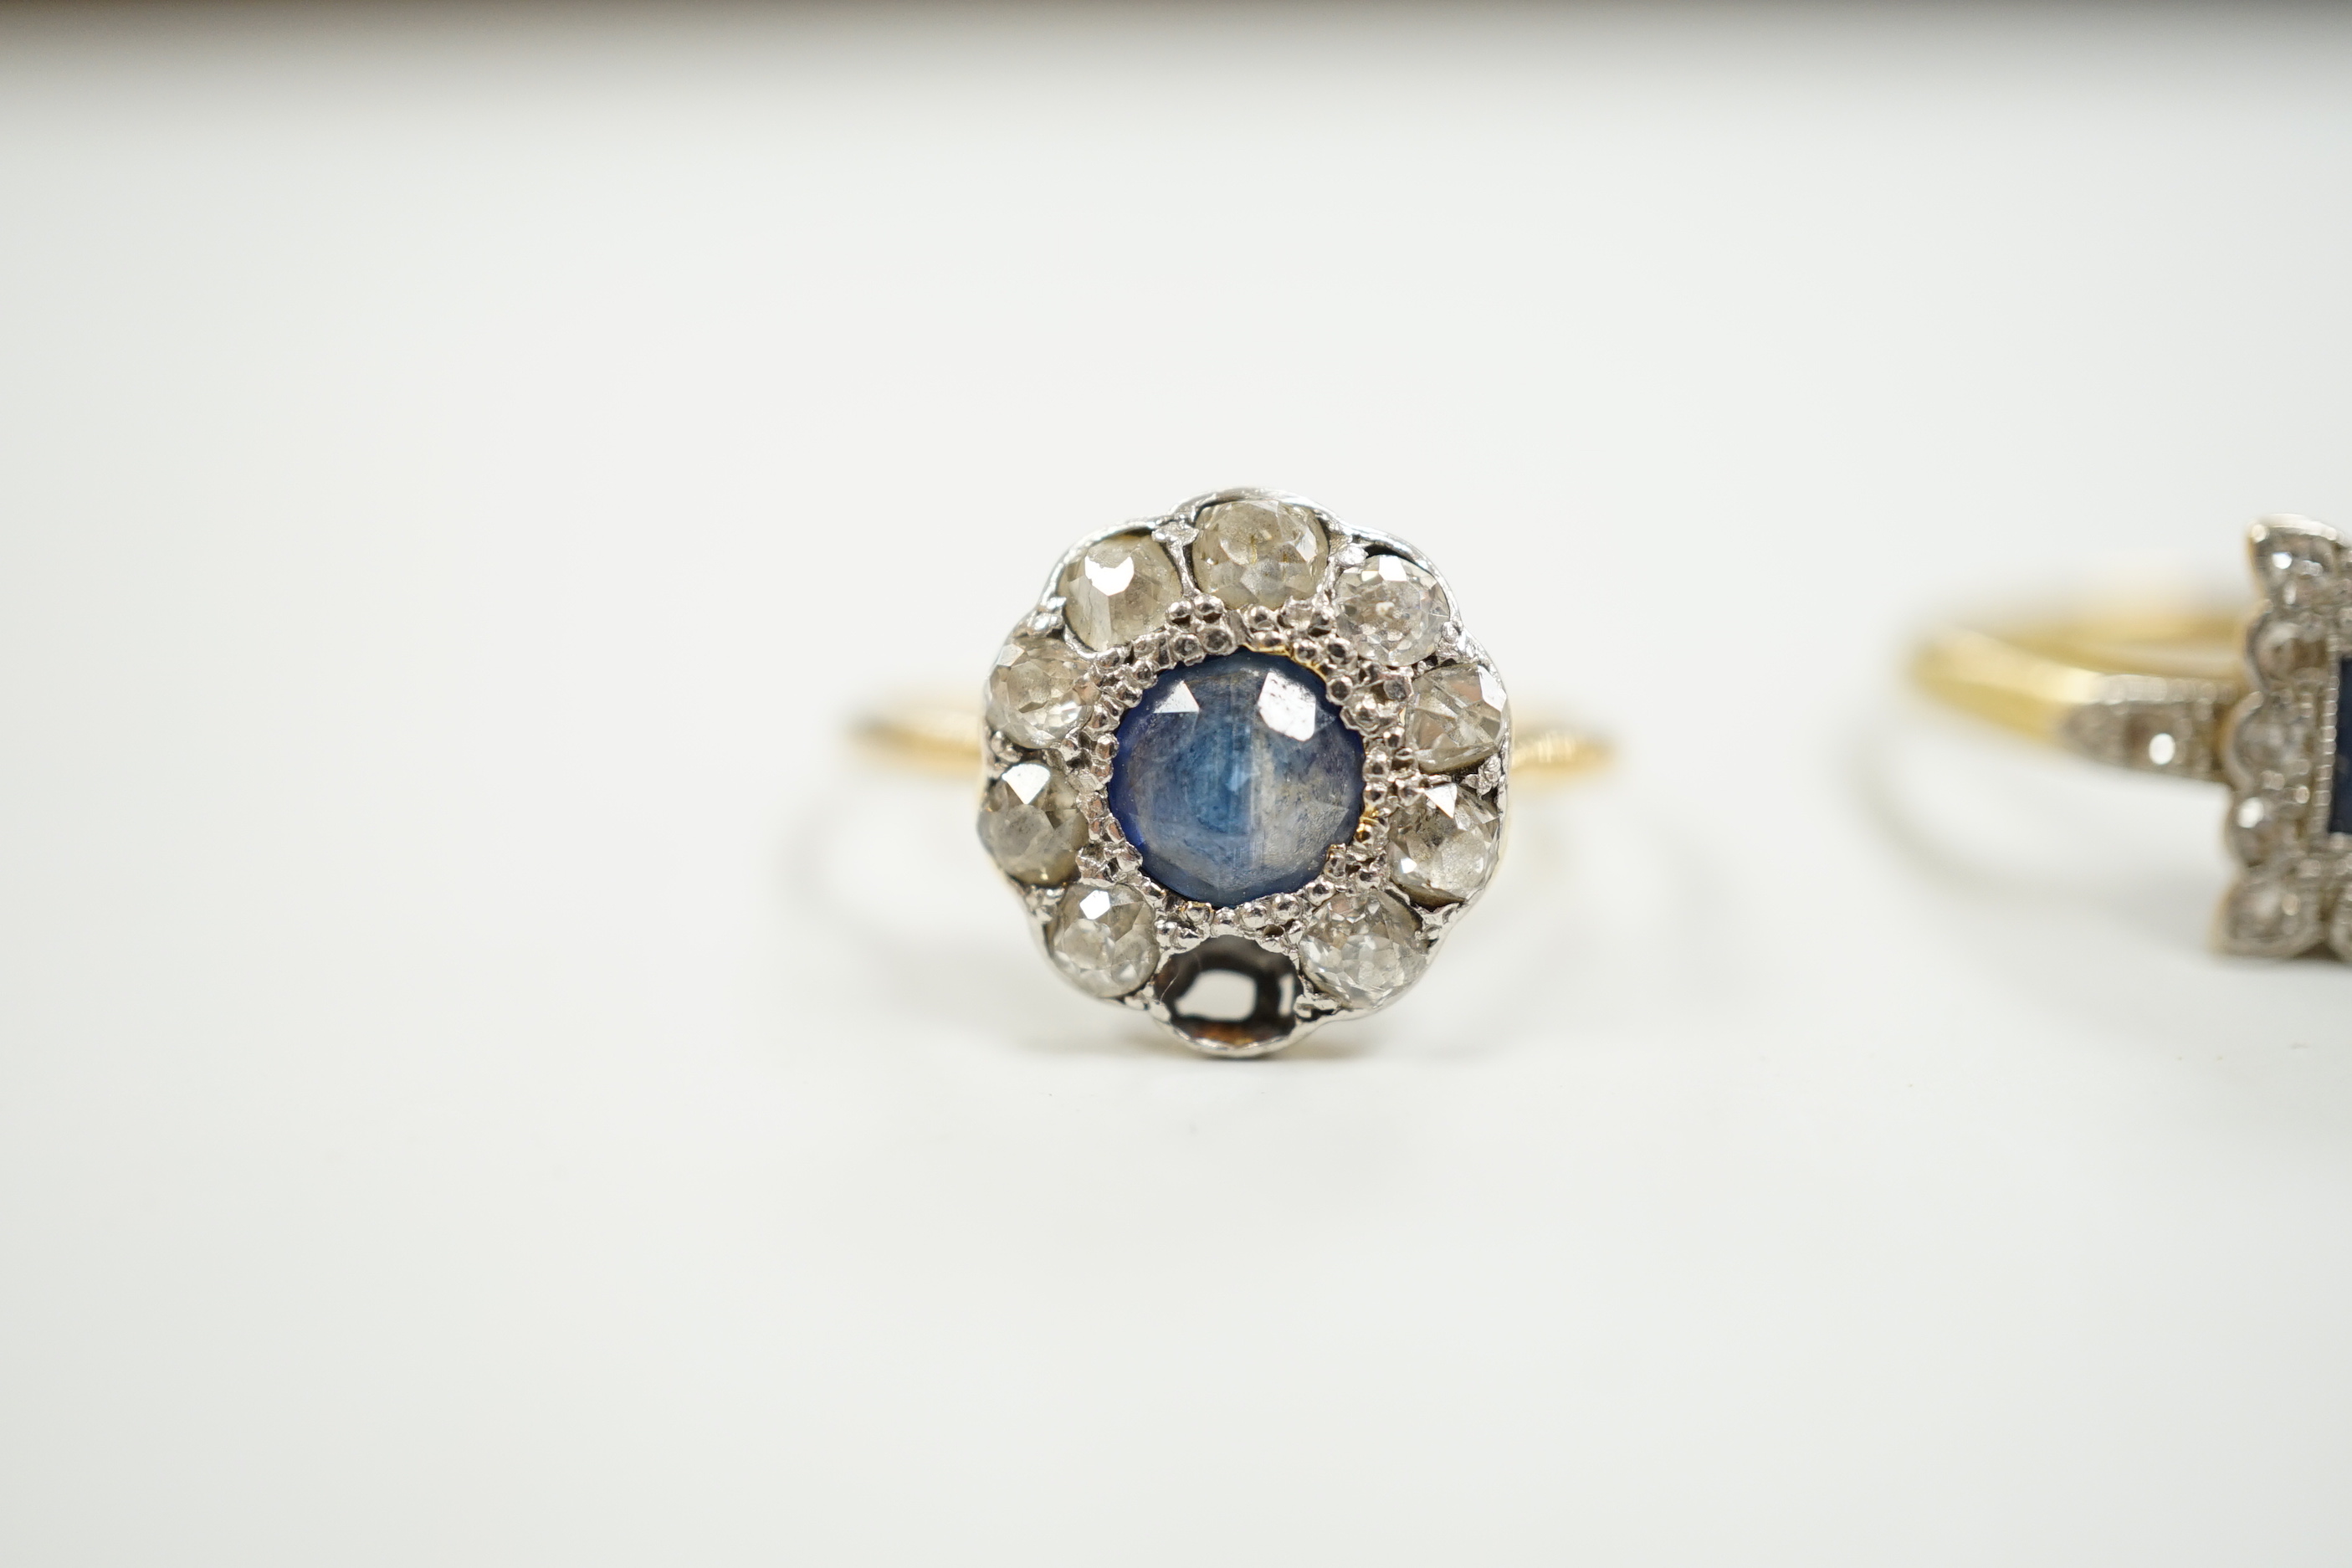 Two 1920's 18ct, sapphire and diamond cluster set dress rings, (one with misshapen shank and missing a diamond), gross weight 6.1 grams.